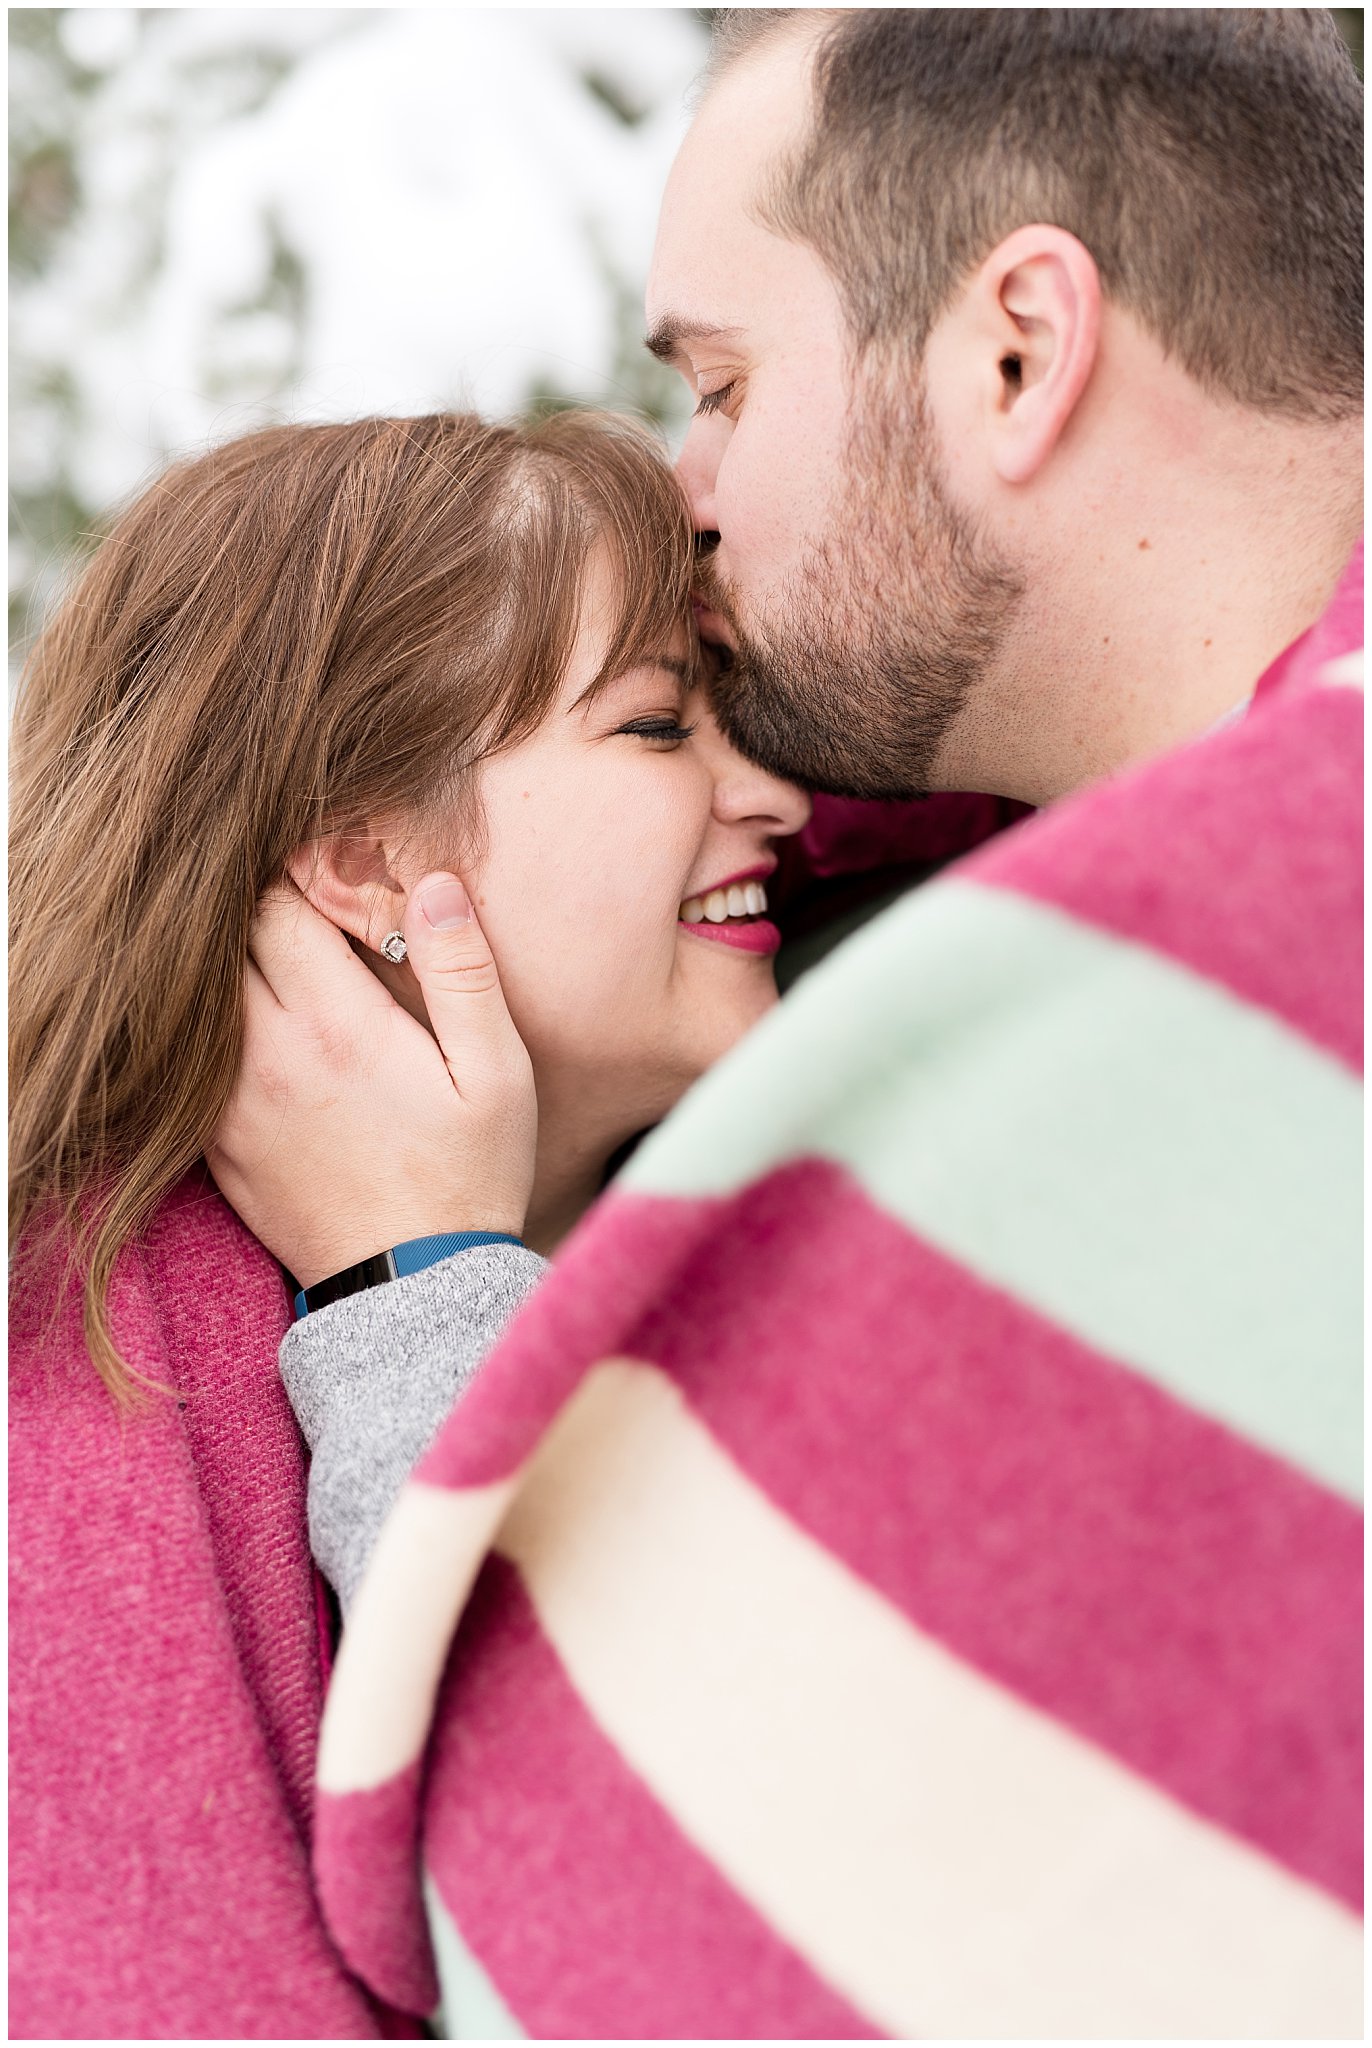 Guy kisses girl on the forehead | Winter Engagement at Mueller Park and the Utah State Capitol | Jessie and Dallin Photography